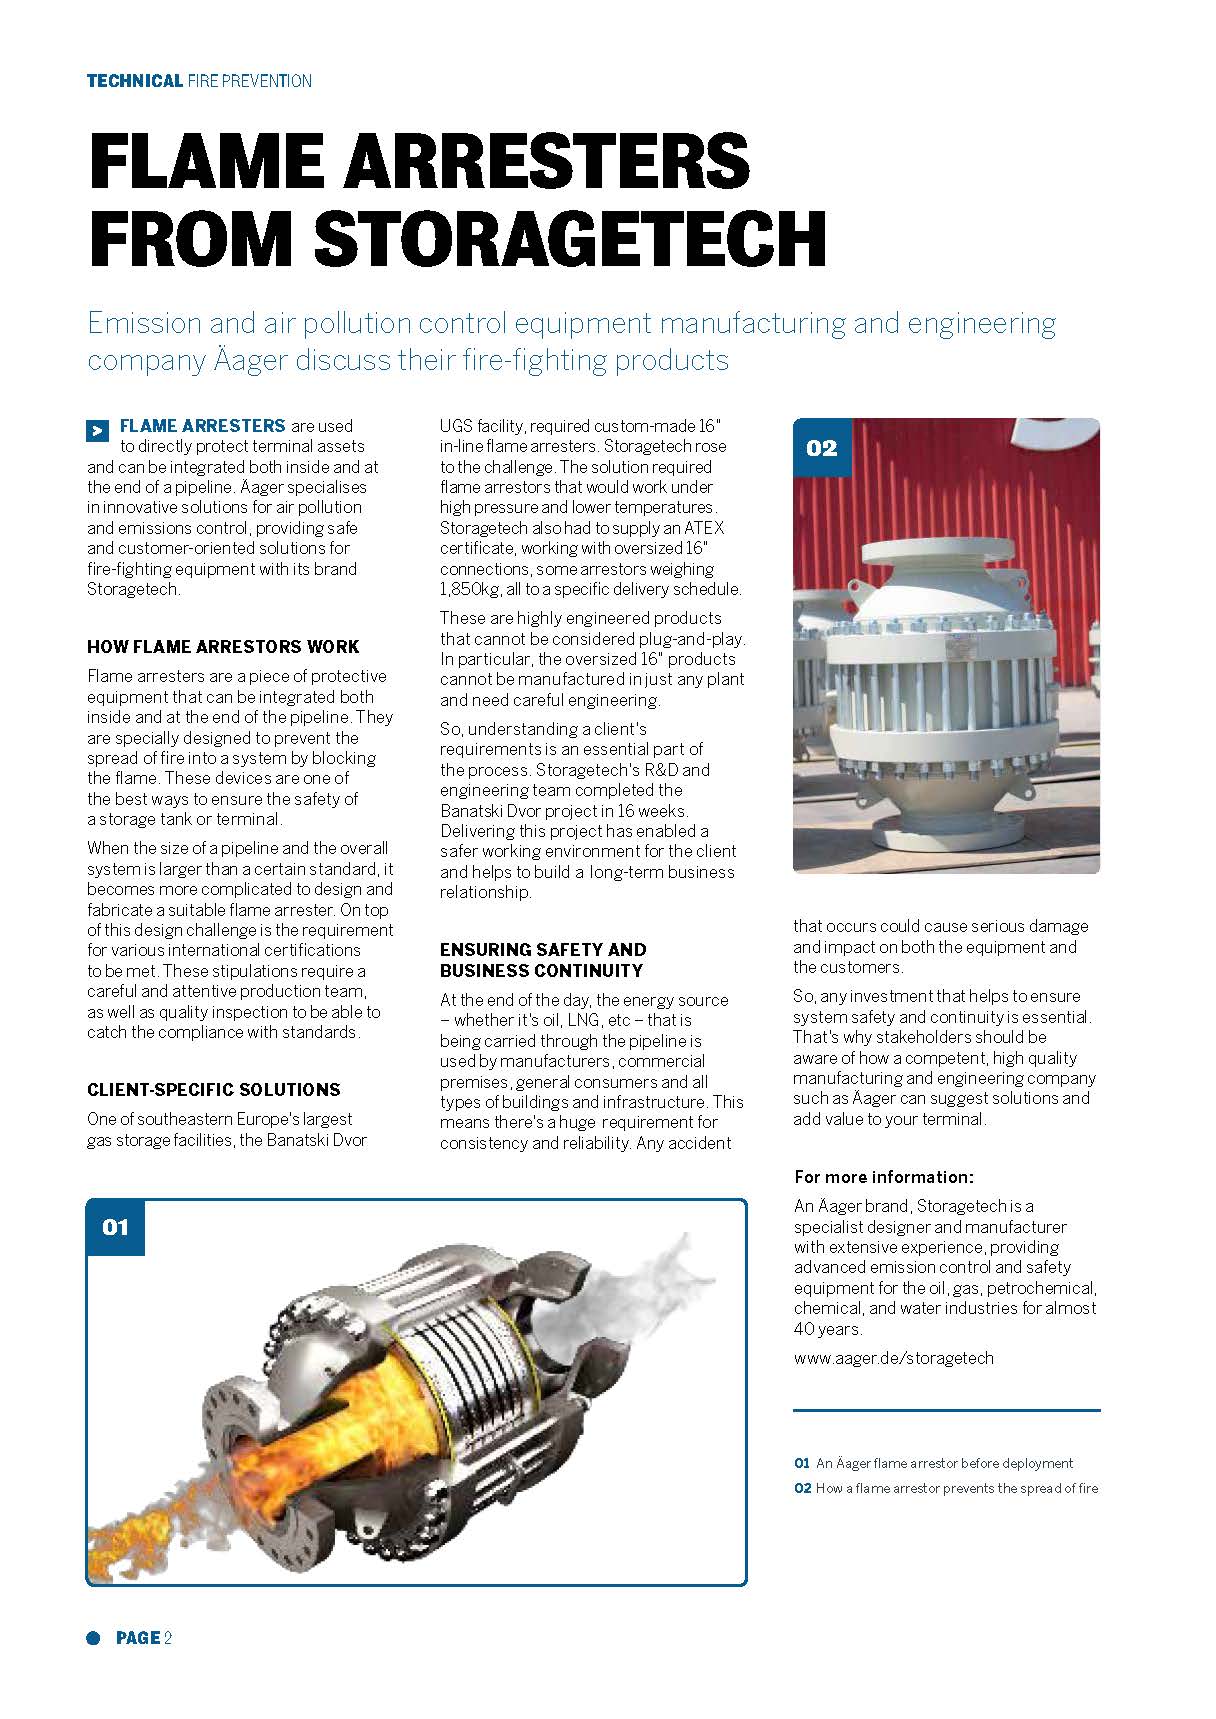 Customer-Oriented Flame Arresters from Storagetech – Tank Storage Magazine Article 11